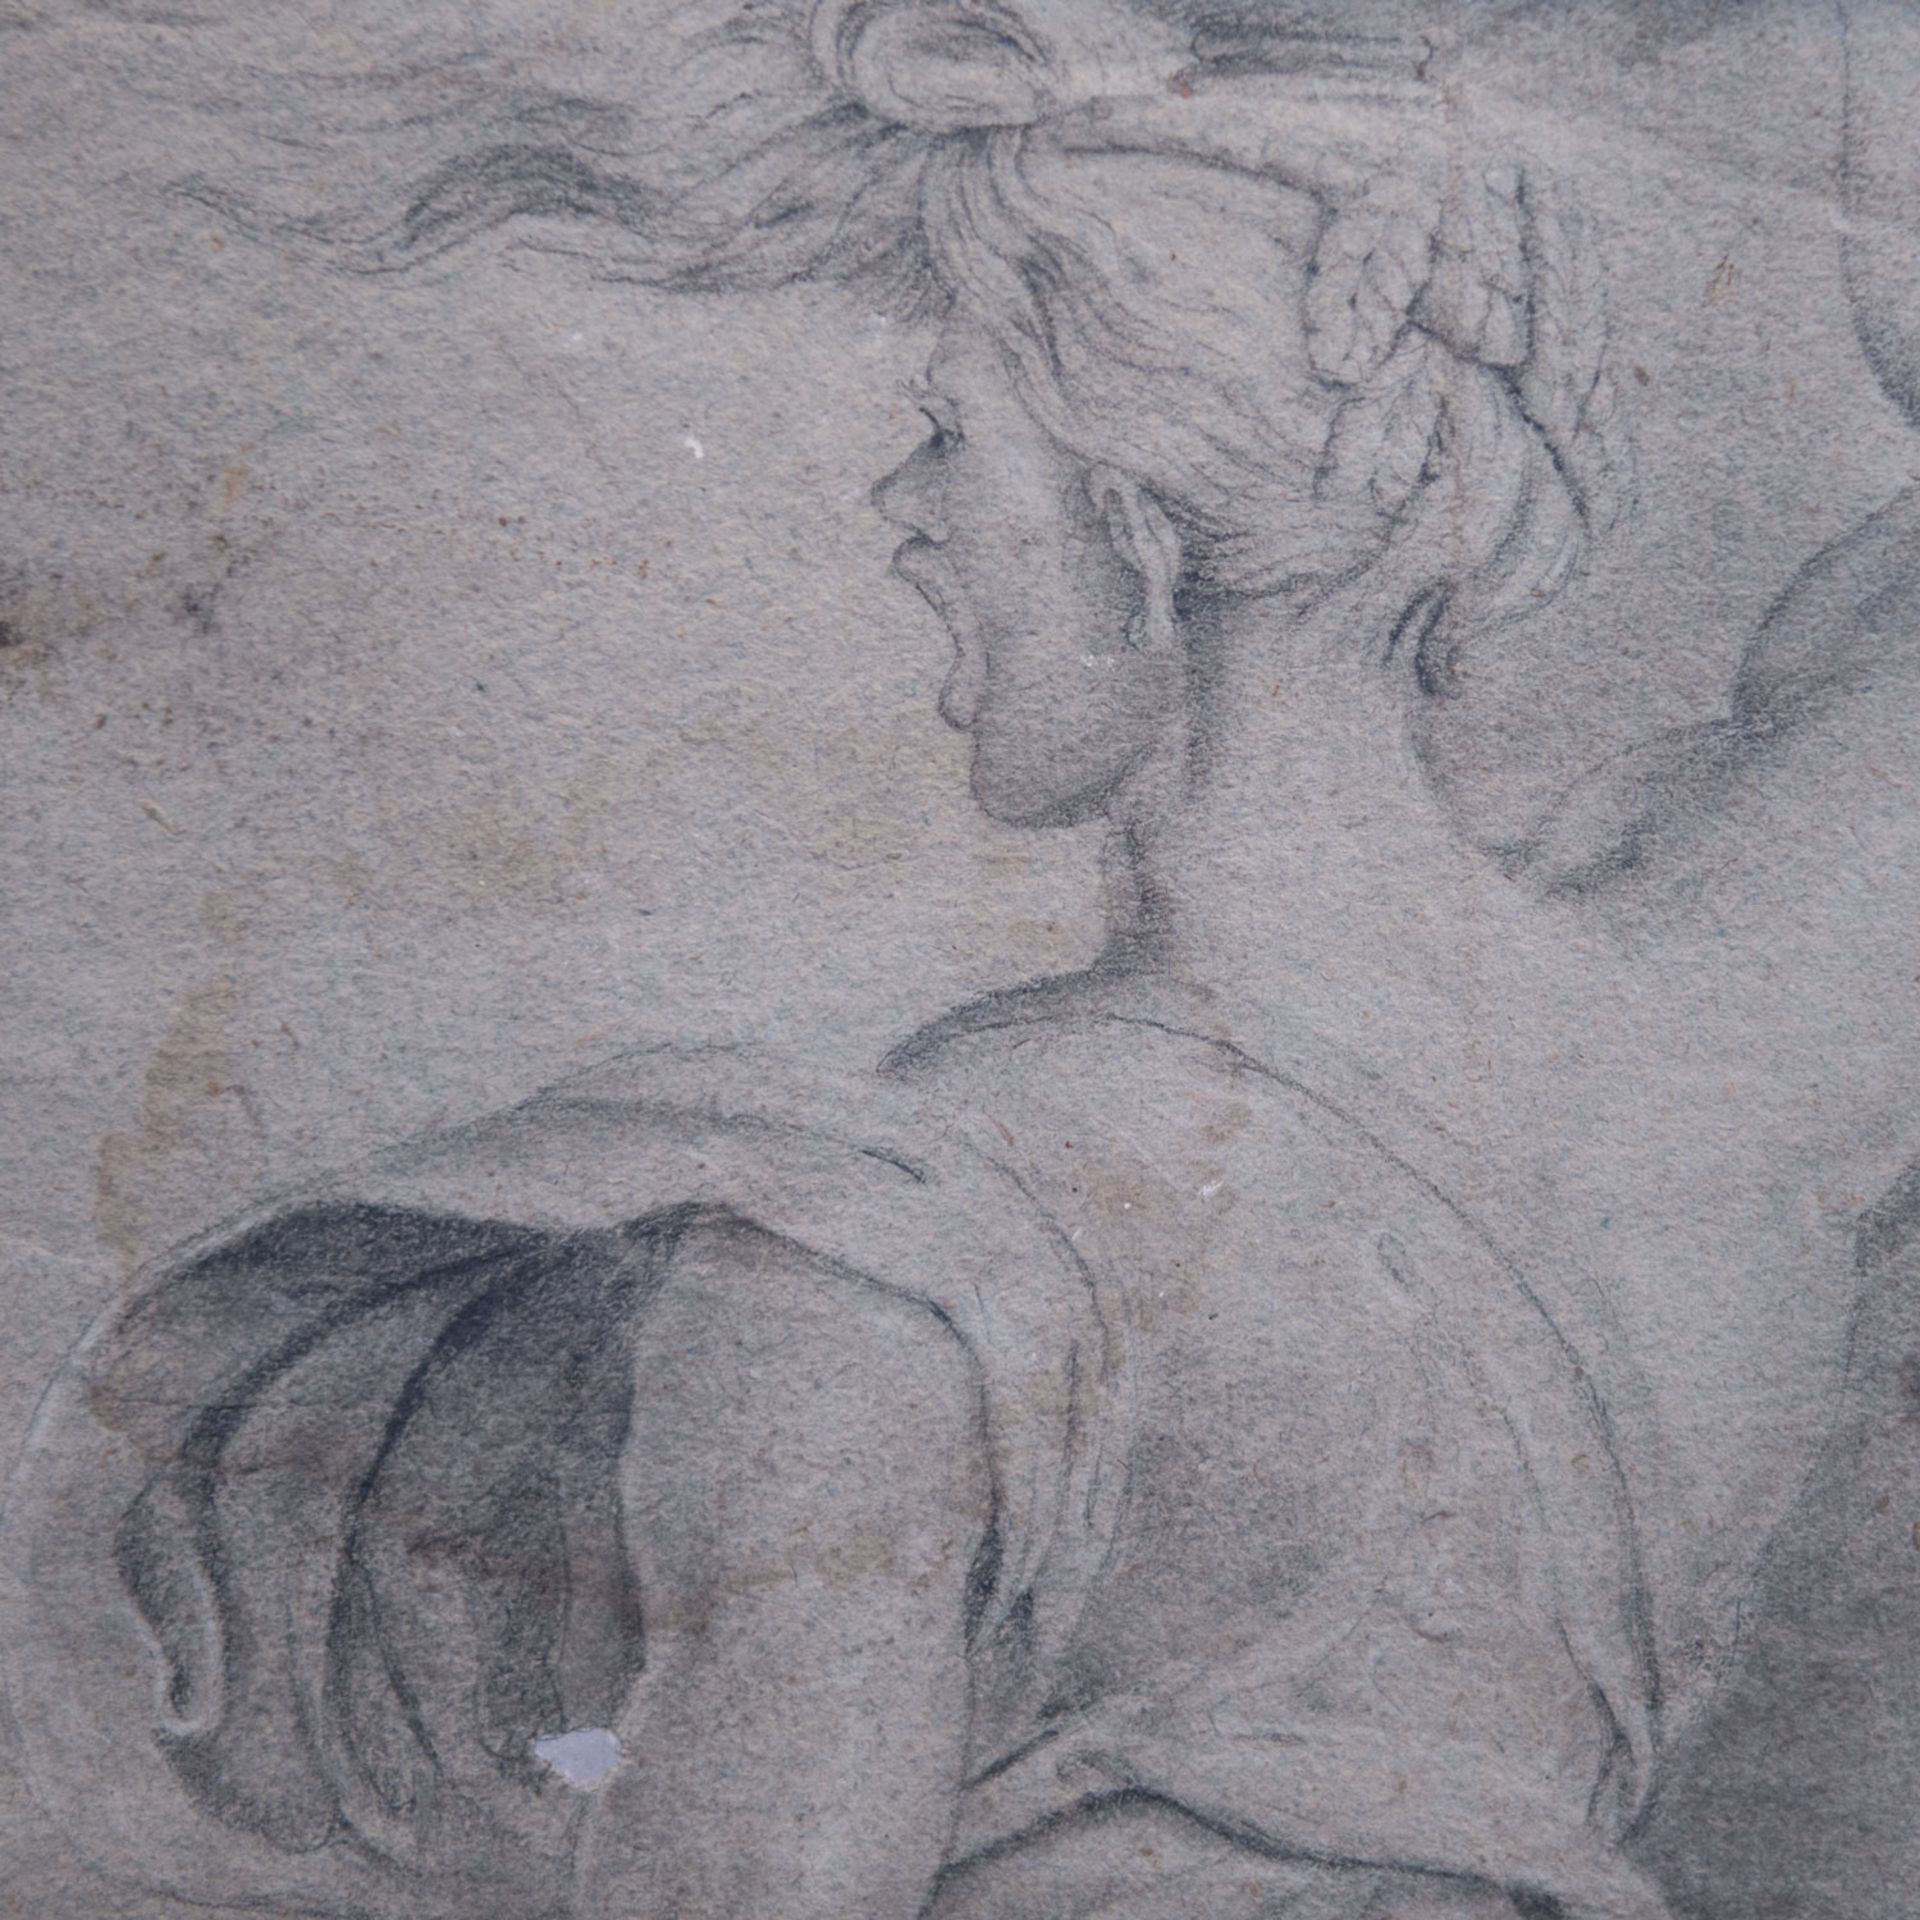 Italian or French Artist 17th/18th Century - Image 3 of 3